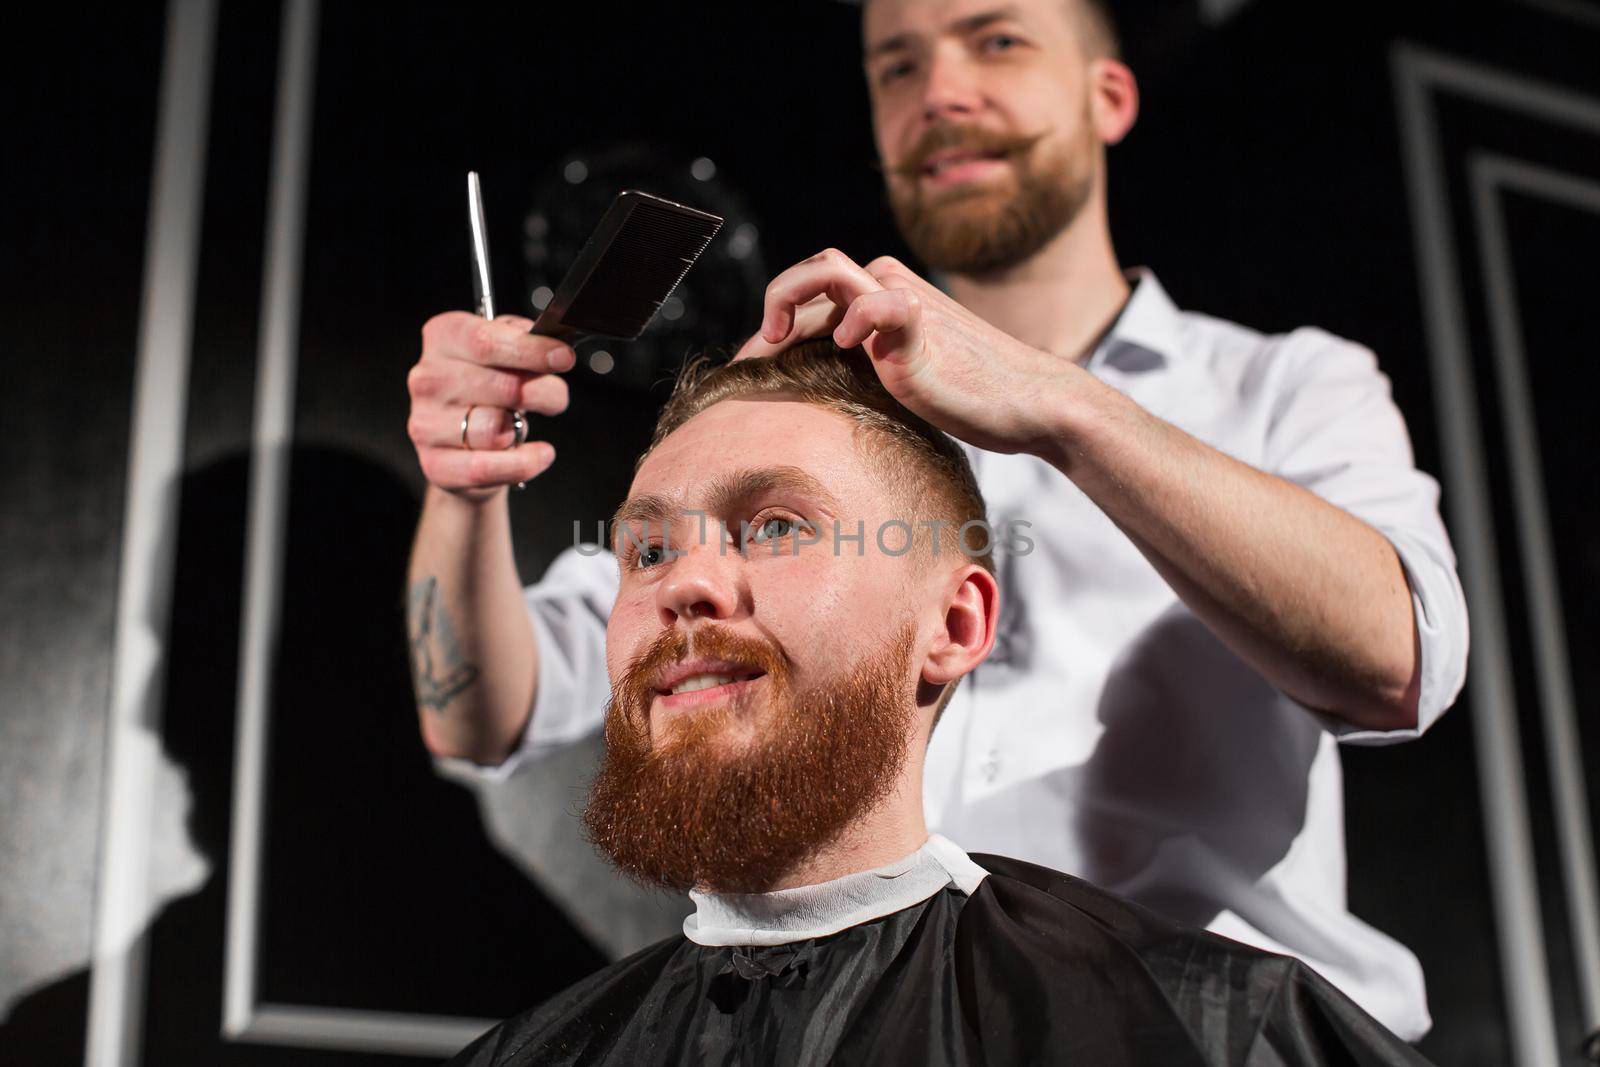 Master cuts hair and beard in the Barber shop. Hairdresser makes hairstyle using scissors and a metal comb. by StudioPeace